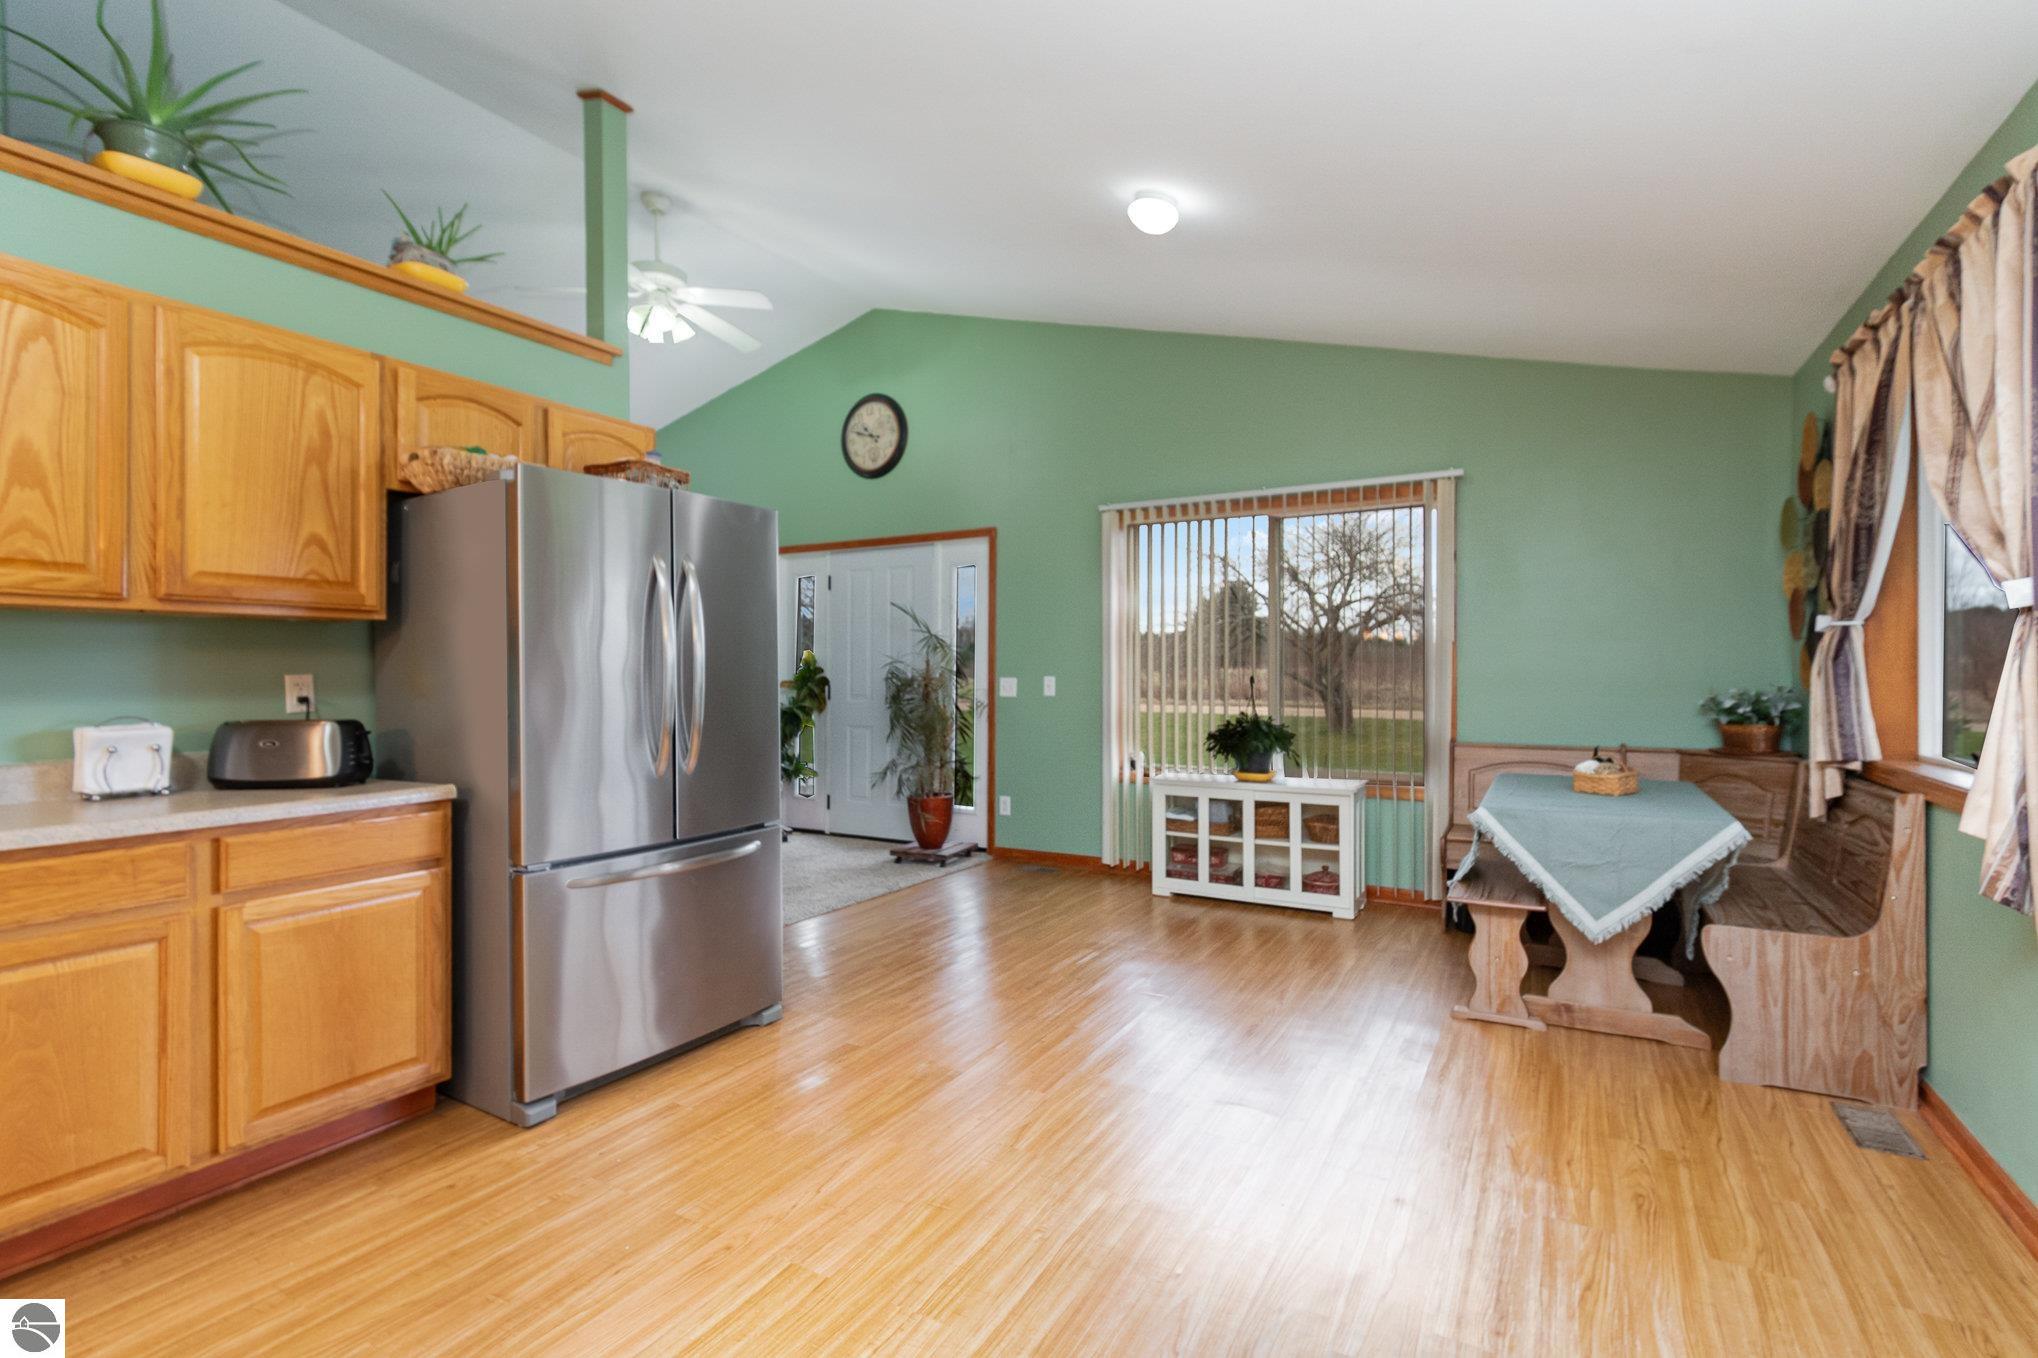 5875 Taber Road, South Branch, MI 48761 photo 5 of 31